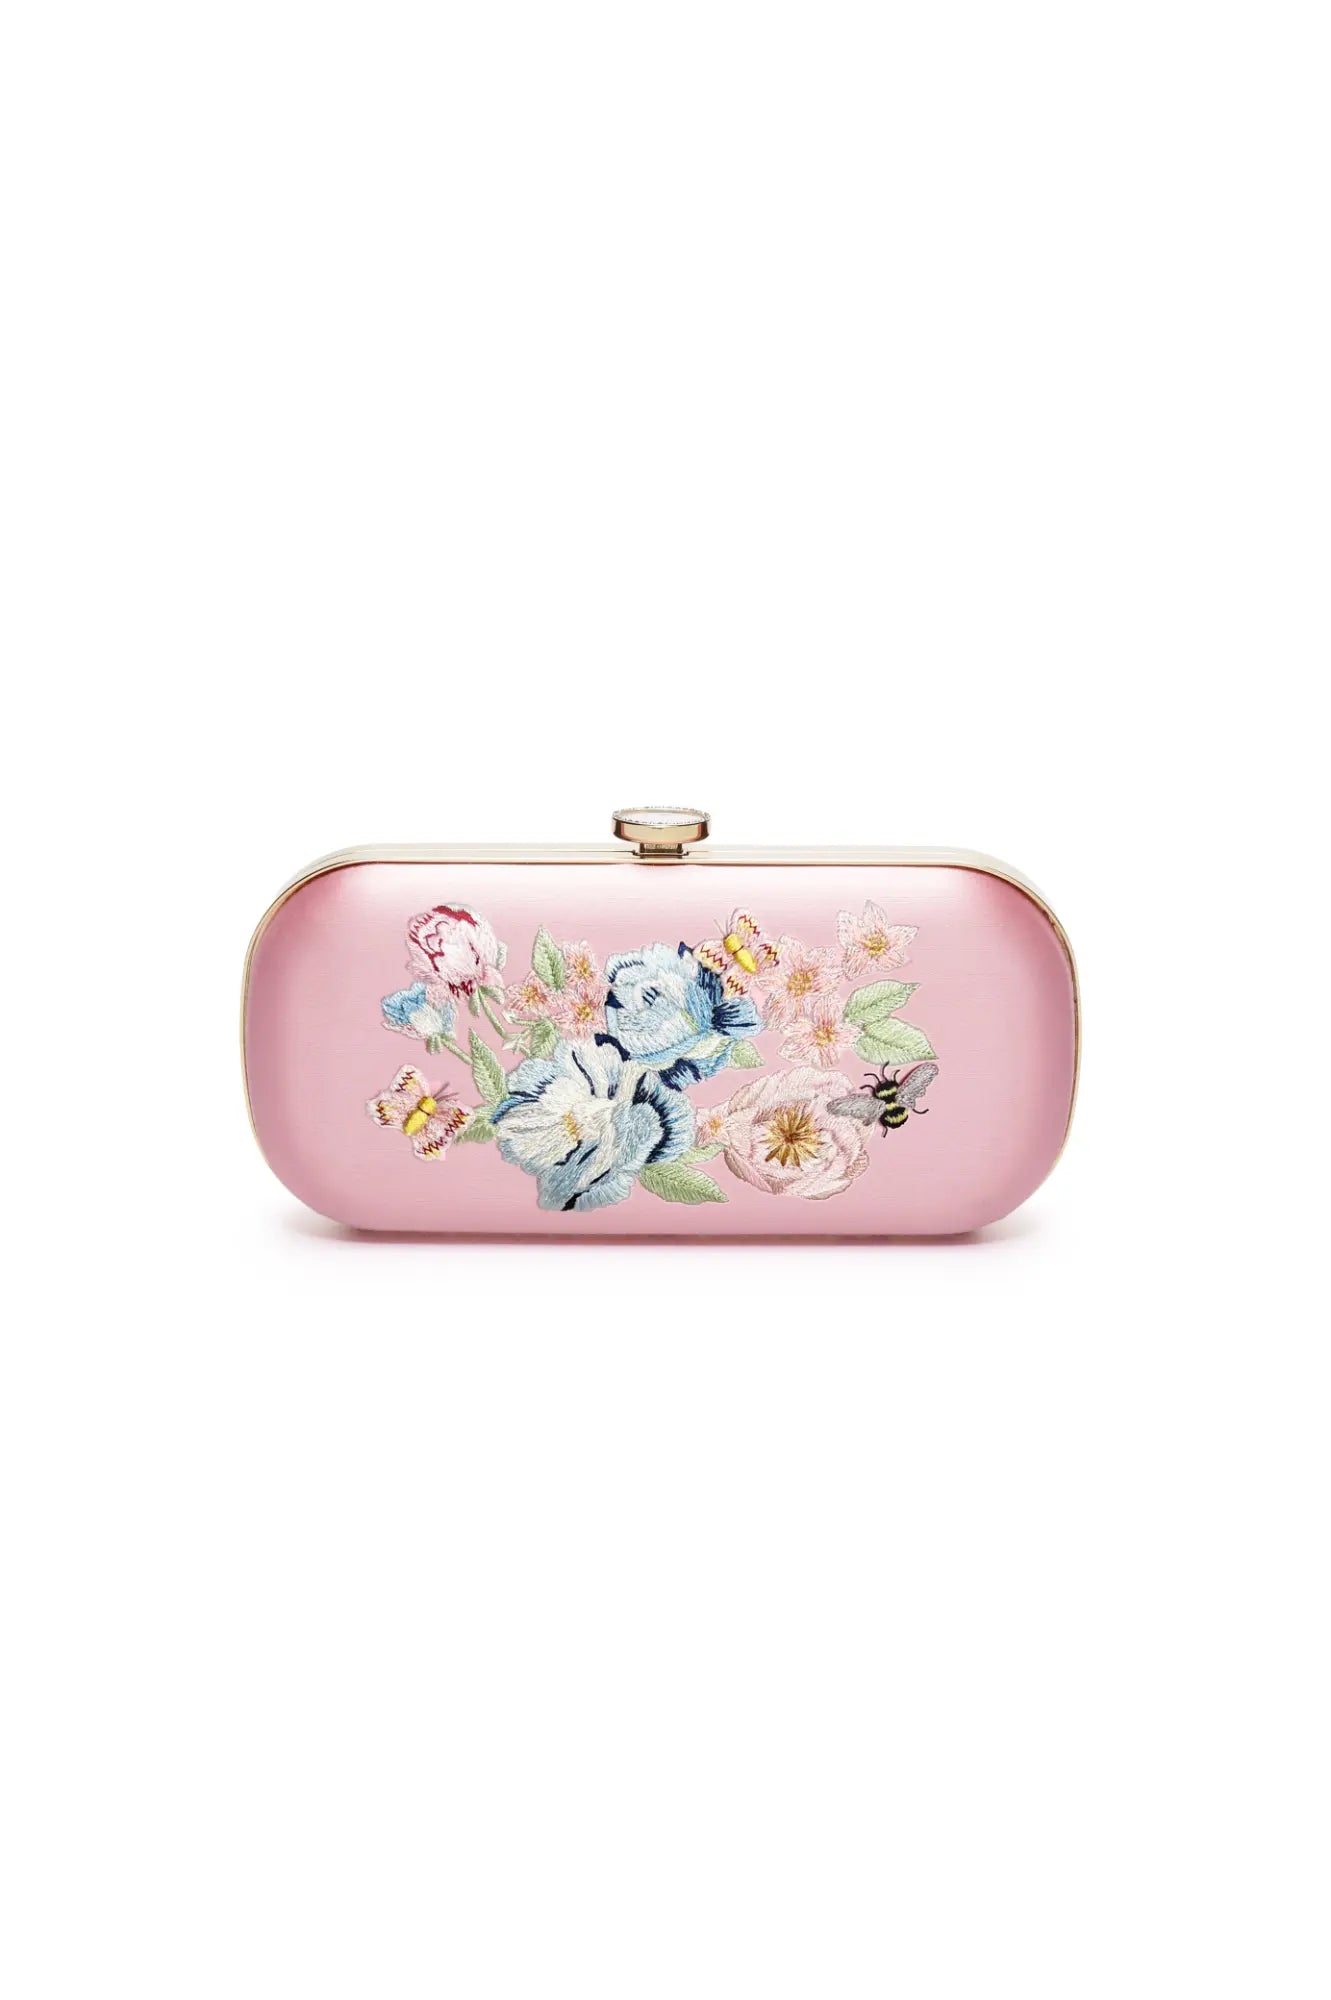 A Bella Rosa Collection Bella Clutch Pink Floral Embroidery Petite purse, made from Italian Duchess Satin.